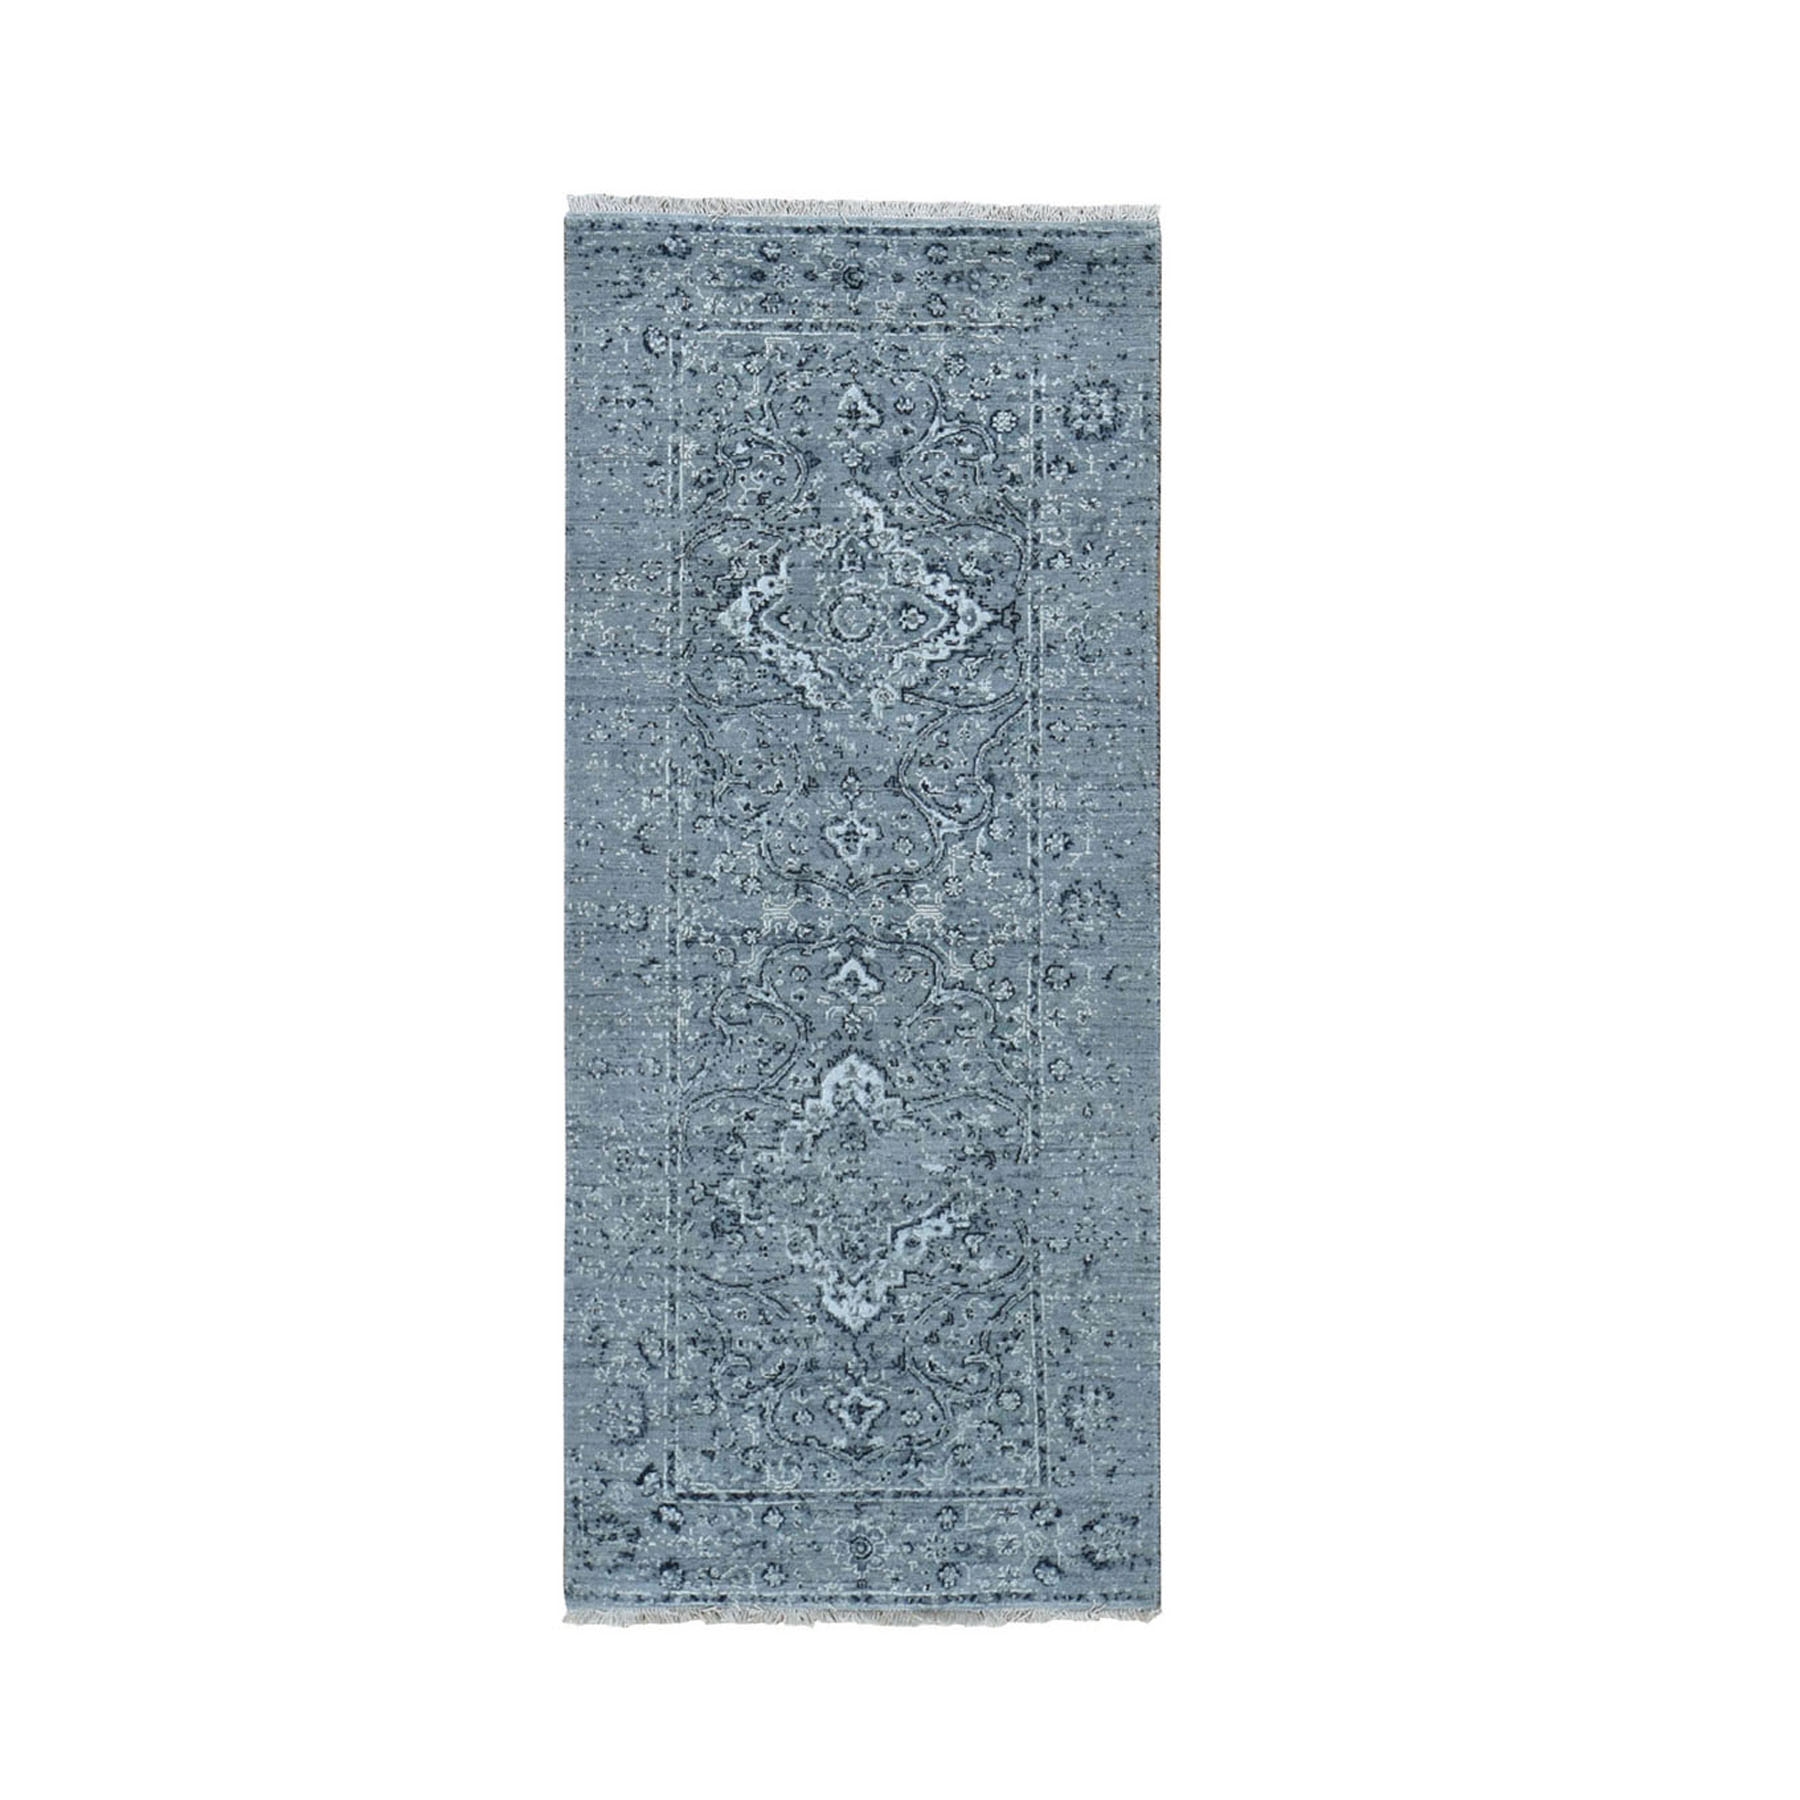 2'6"X6' Gray Broken Persian Erased Design Runner Silk With Textured Wool Hand Knotted Oriental Rug moad900a